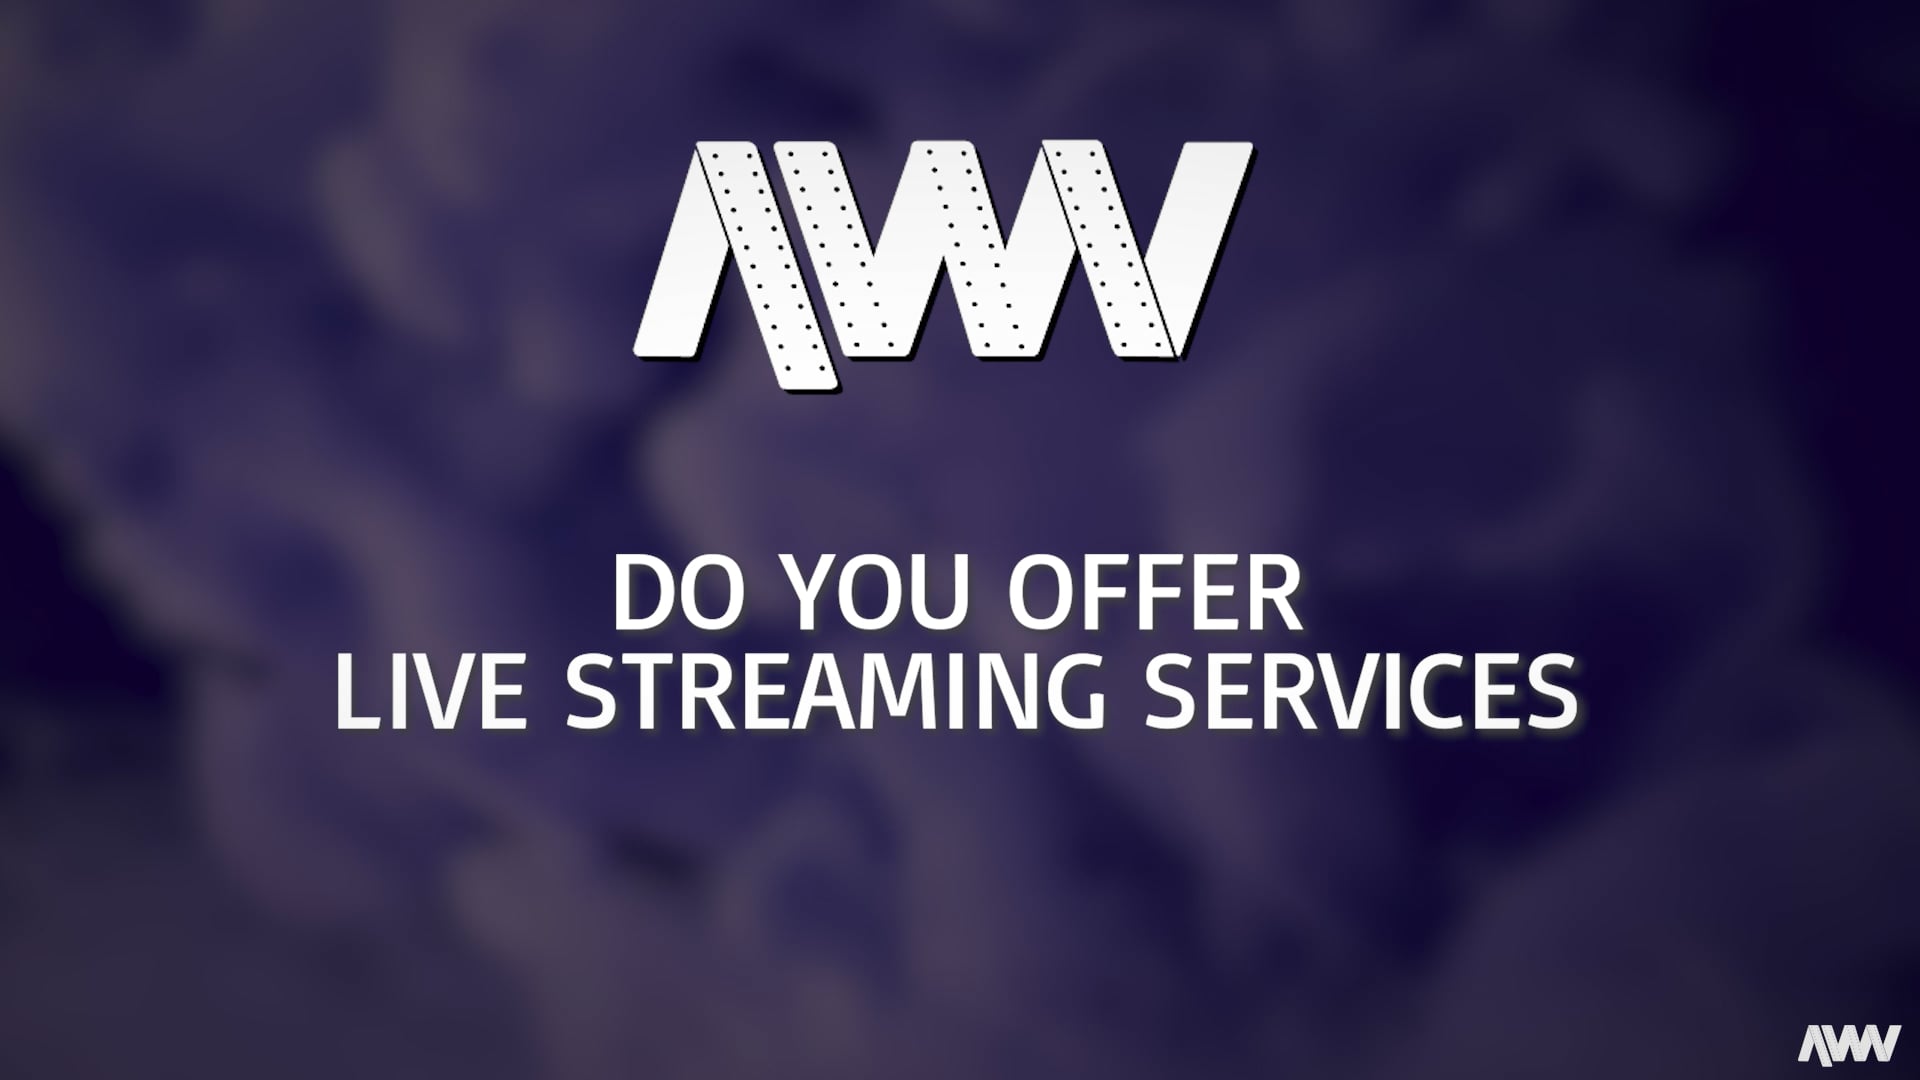 Does AWV Offer Live Streaming Services?